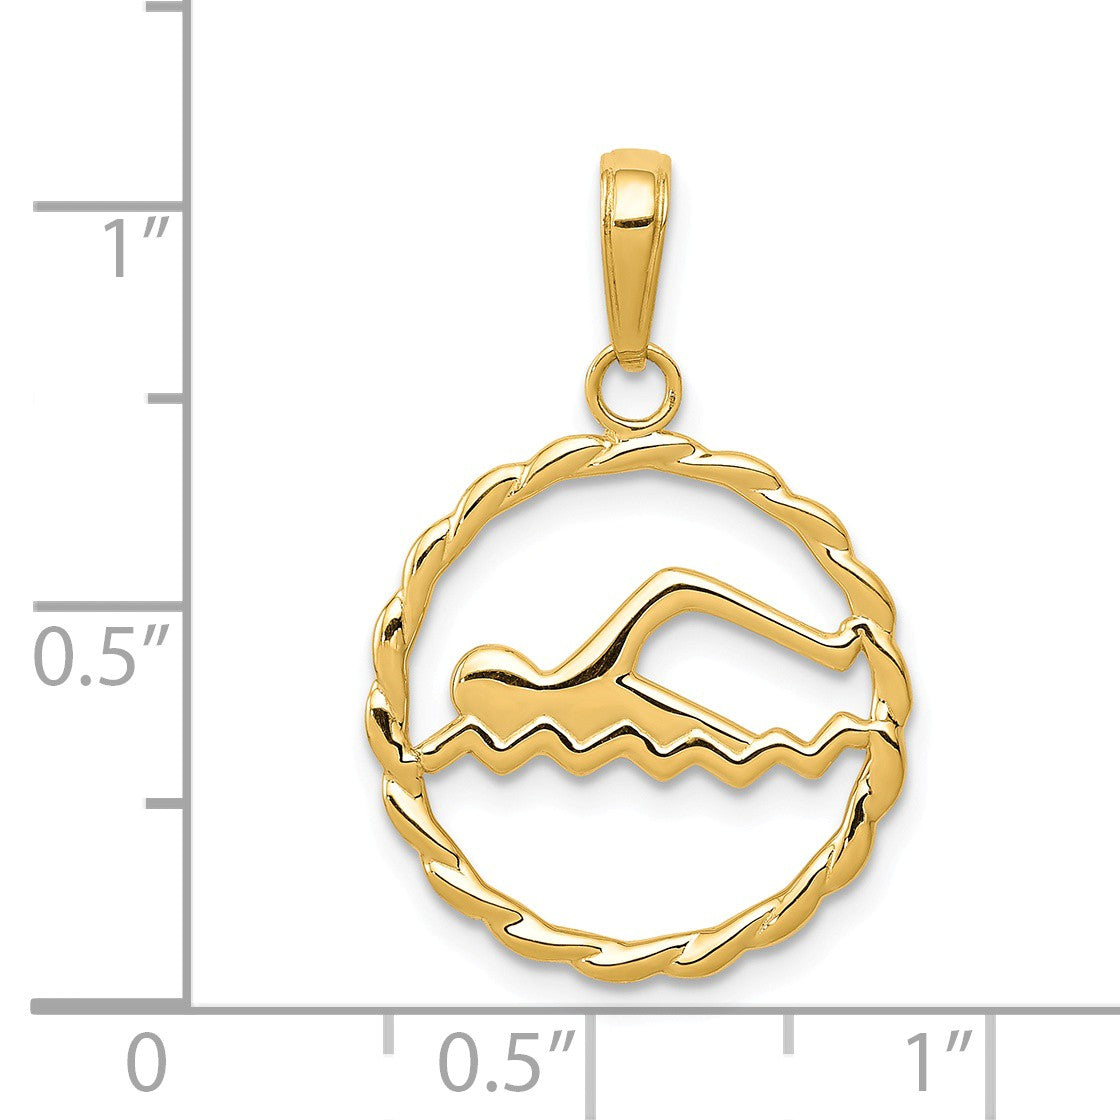 Alternate view of the 14k Yellow Gold 16mm Swimming Pendant by The Black Bow Jewelry Co.